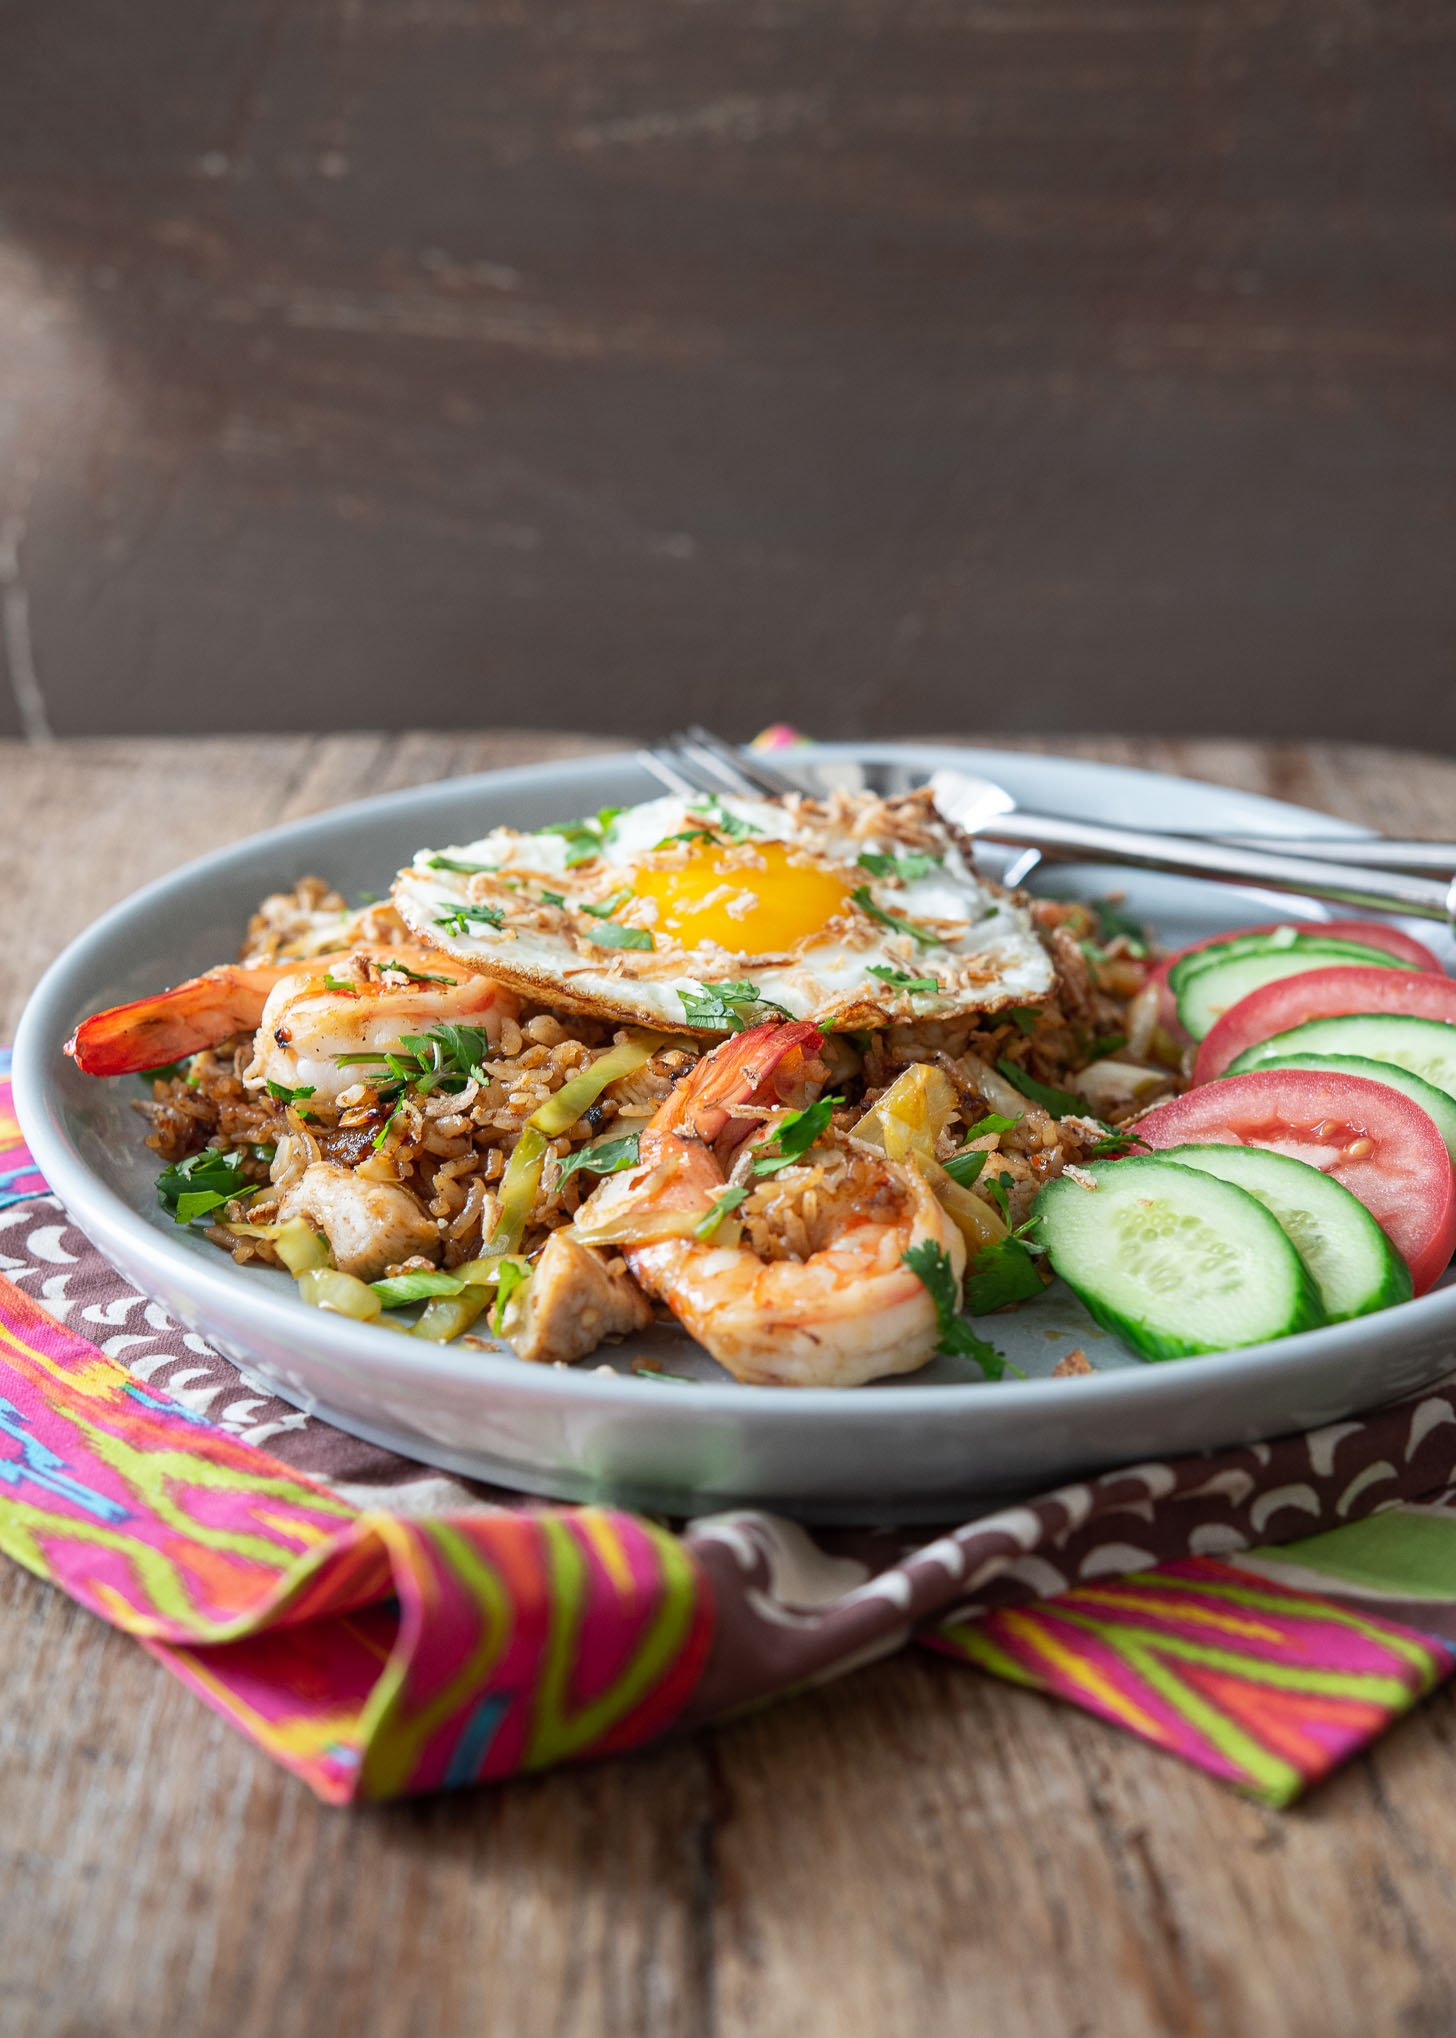 Indonesian fried rice (Nasi Goreng) is served with cucumber and tomato slices in a plate.